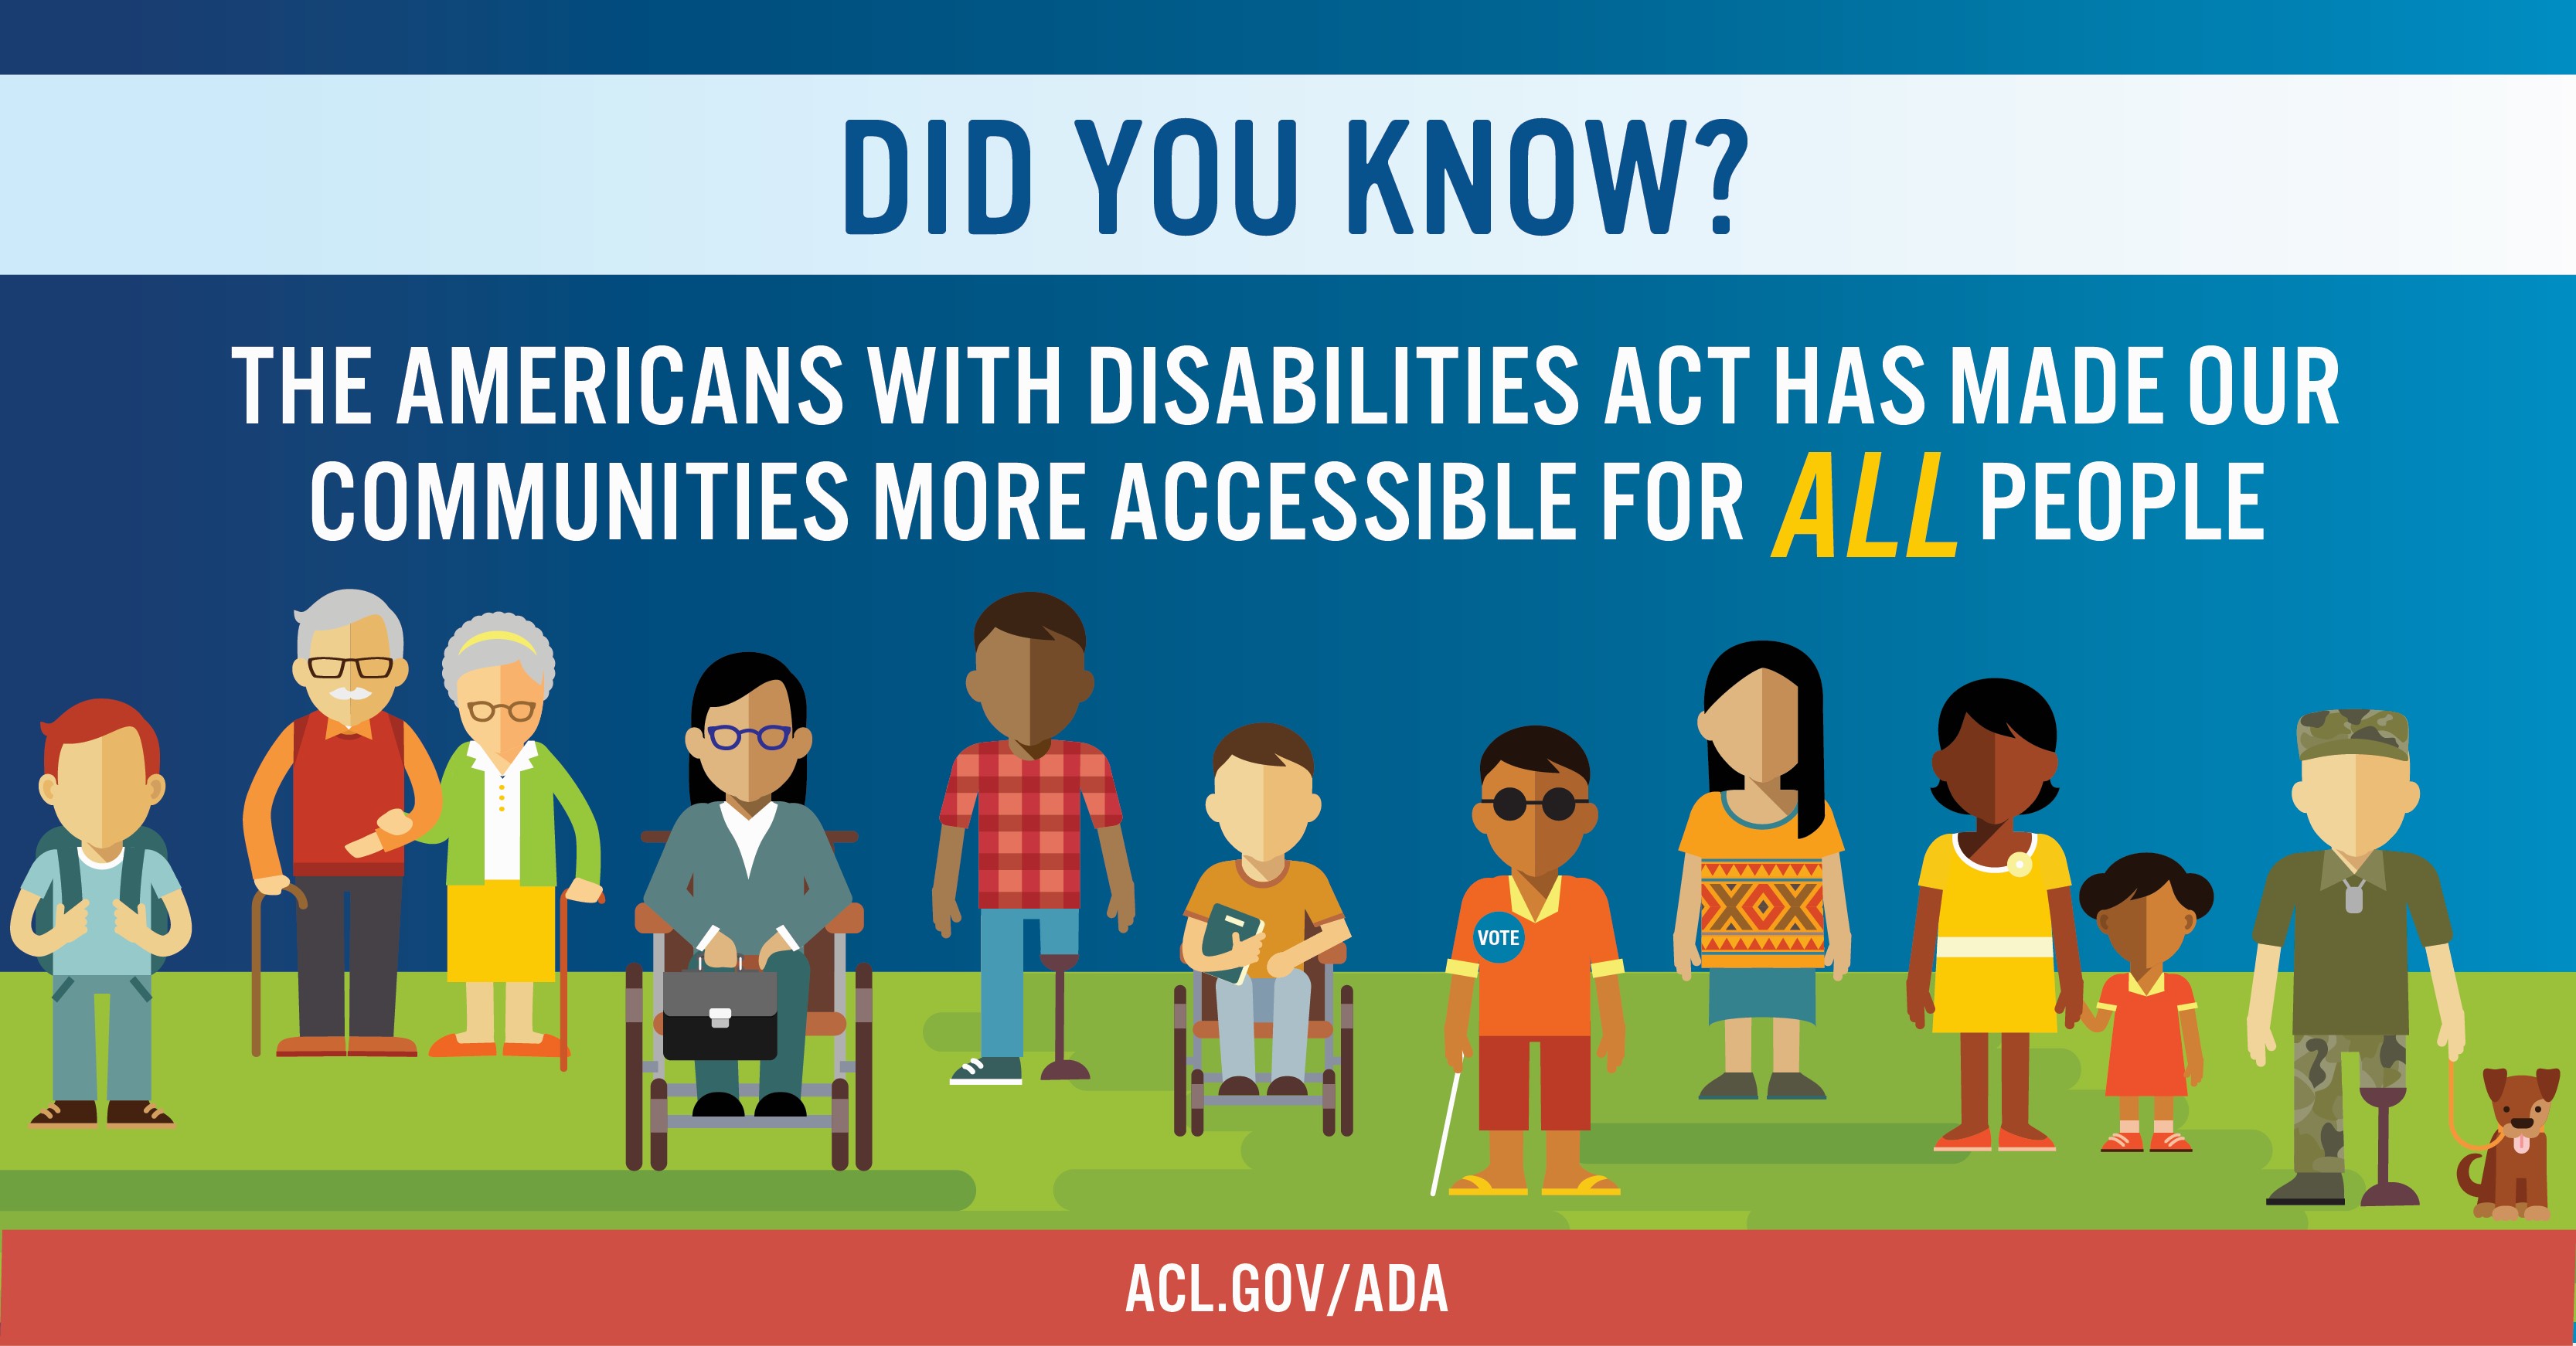 The ADA has made our communities more accessible for all people